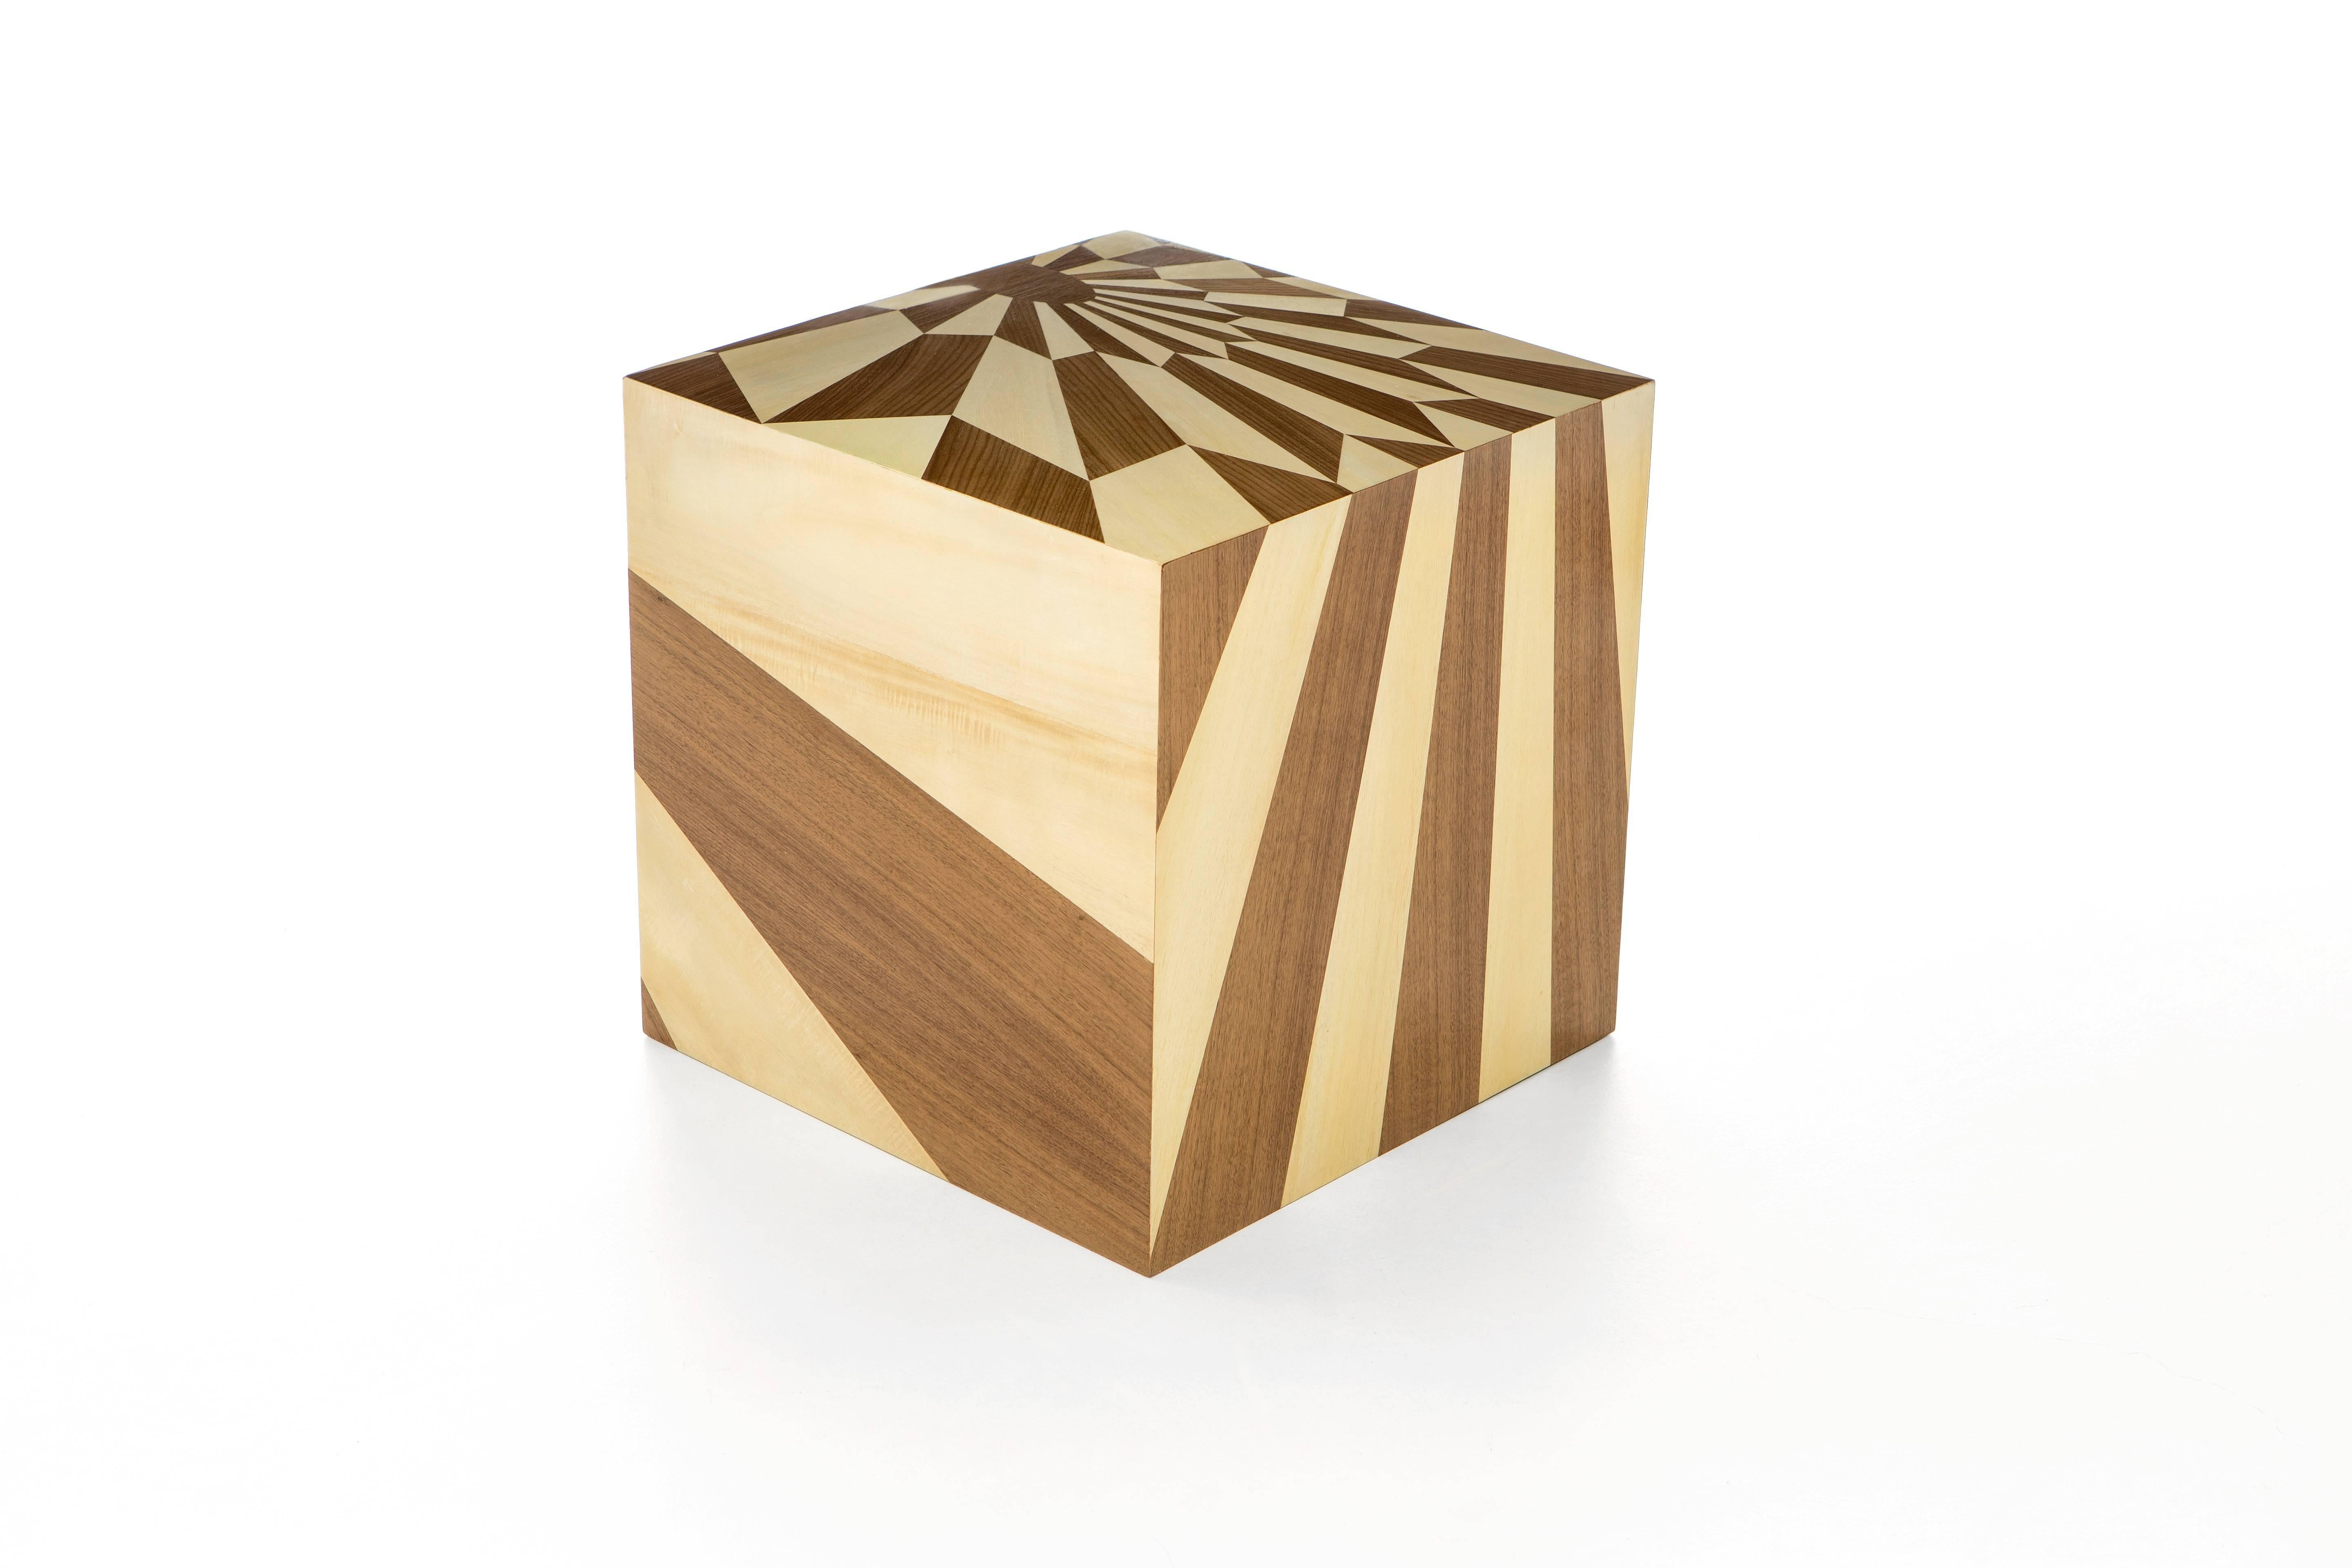 The tectonic silence cube, an unusual & dynamic piece of furniture, is covered in magnificent wood marquetry geometric pattern is a wonderful example of versatility and storage possibilities. This noble technique consists of hand-cutting perfectly